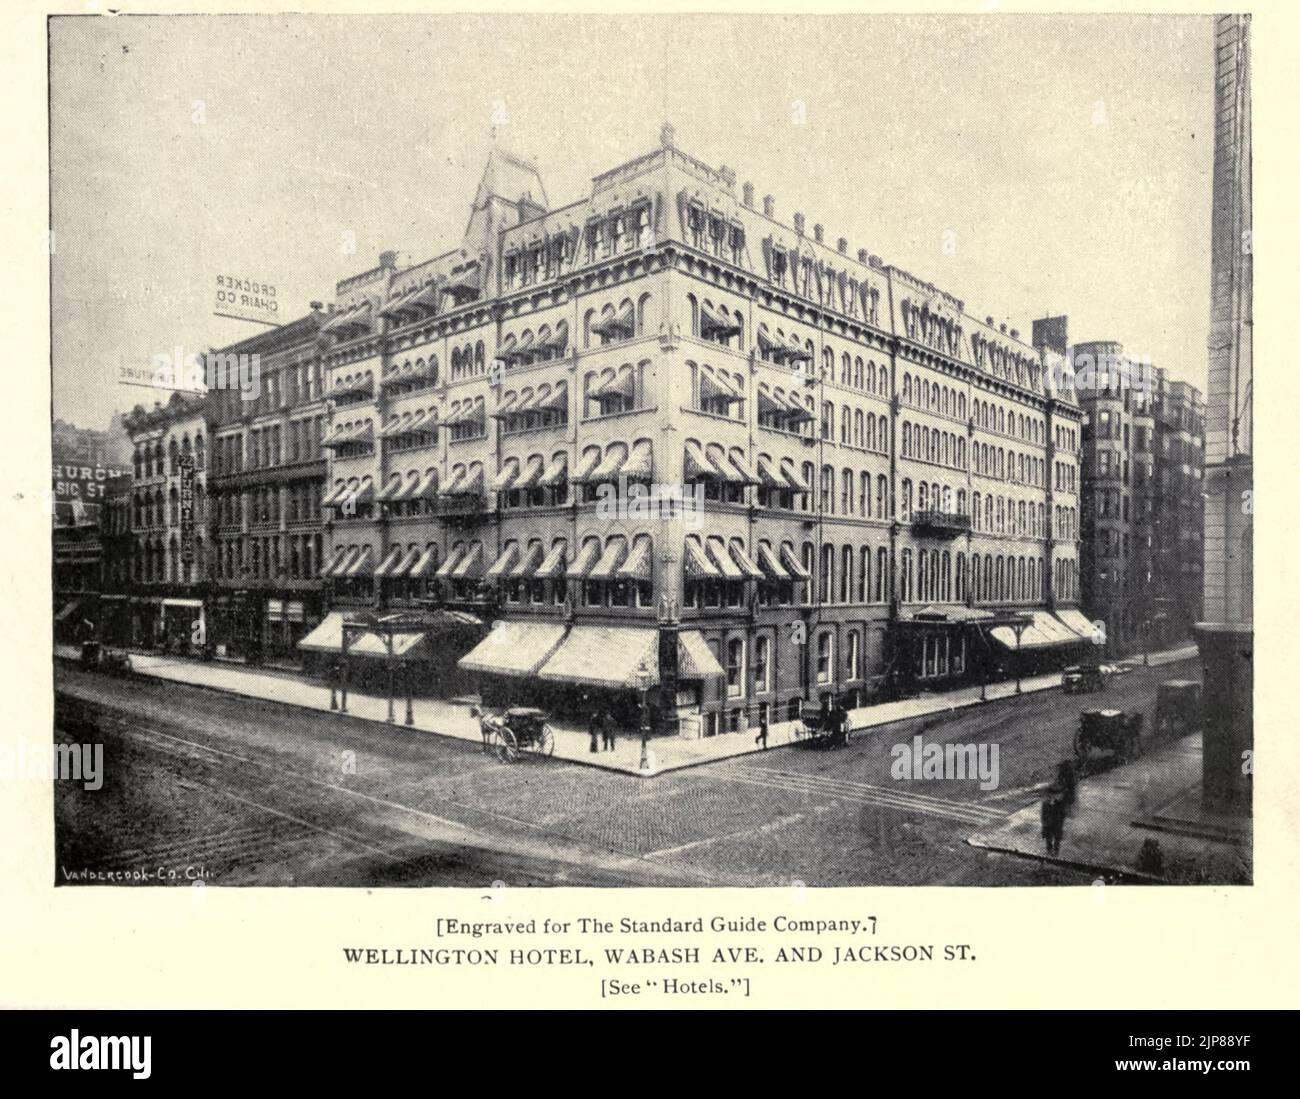 Wellington Hotel Wabash Ave. and Jackson Street from the book Chicago, the marvelous city of the West : a history, an encyclopedia and a guide : 1893 : illustrated by John Joseph Flinn, Publisher Chicago : Flinn & Sheppard Stock Photo